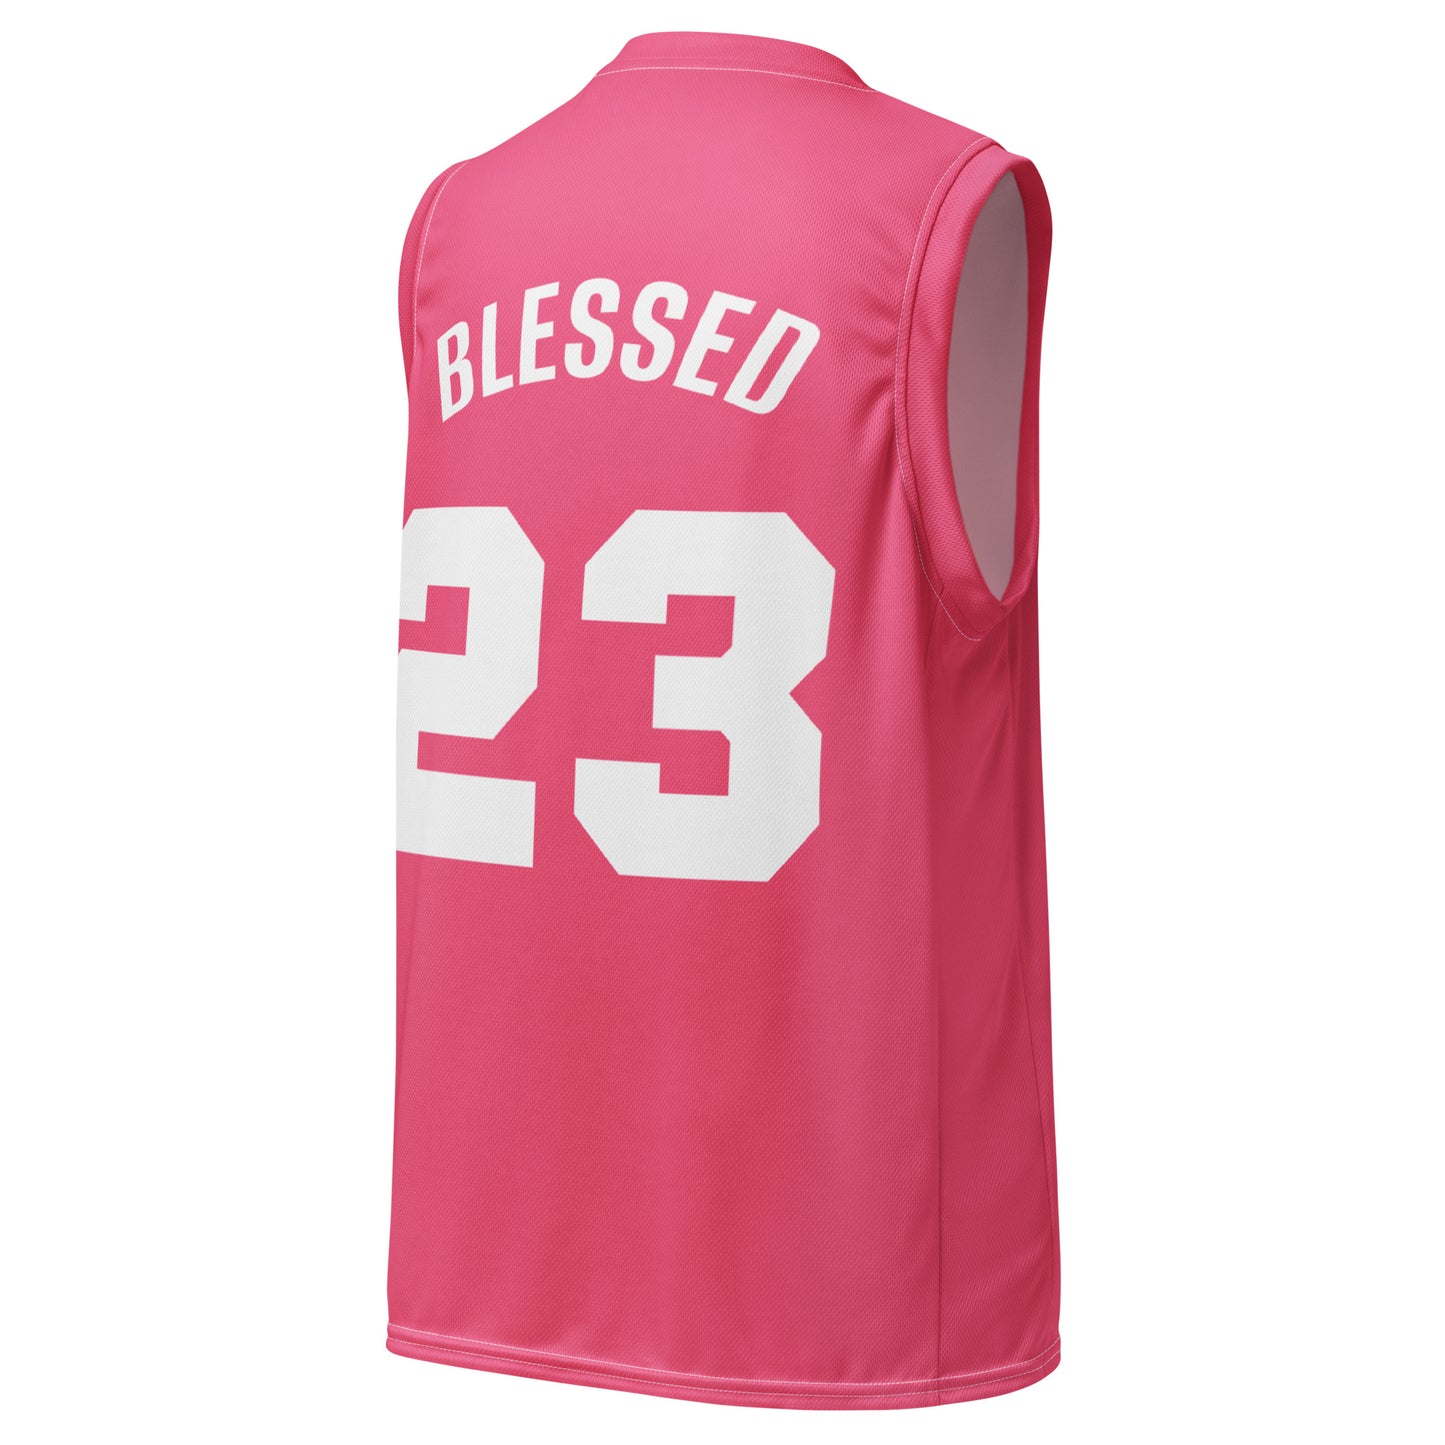 #23 BLESSED pink and white basketball jersey